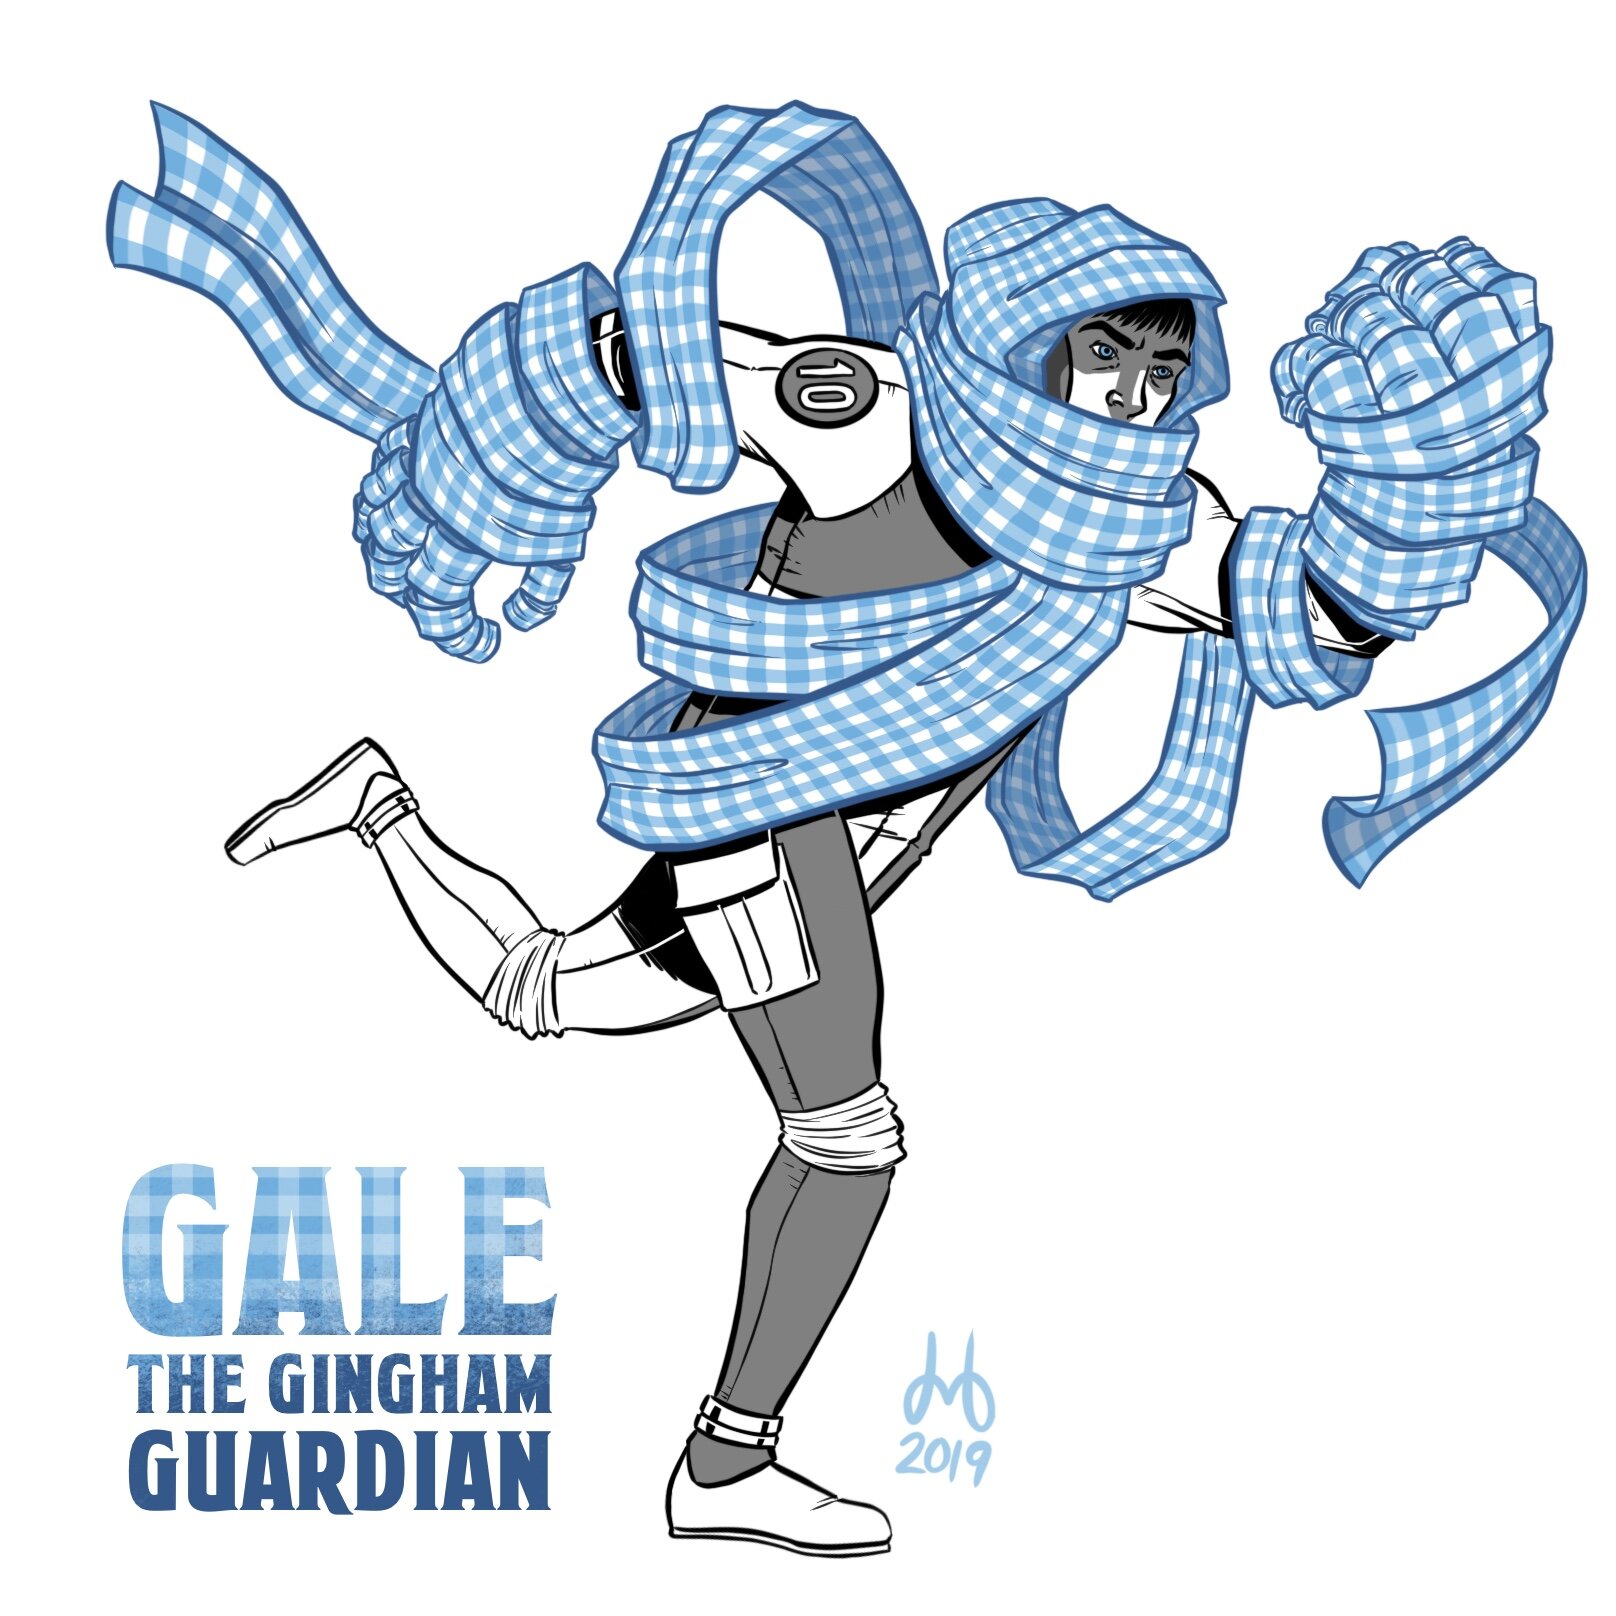 10 Pattern: Gale, the Gingham Guardian